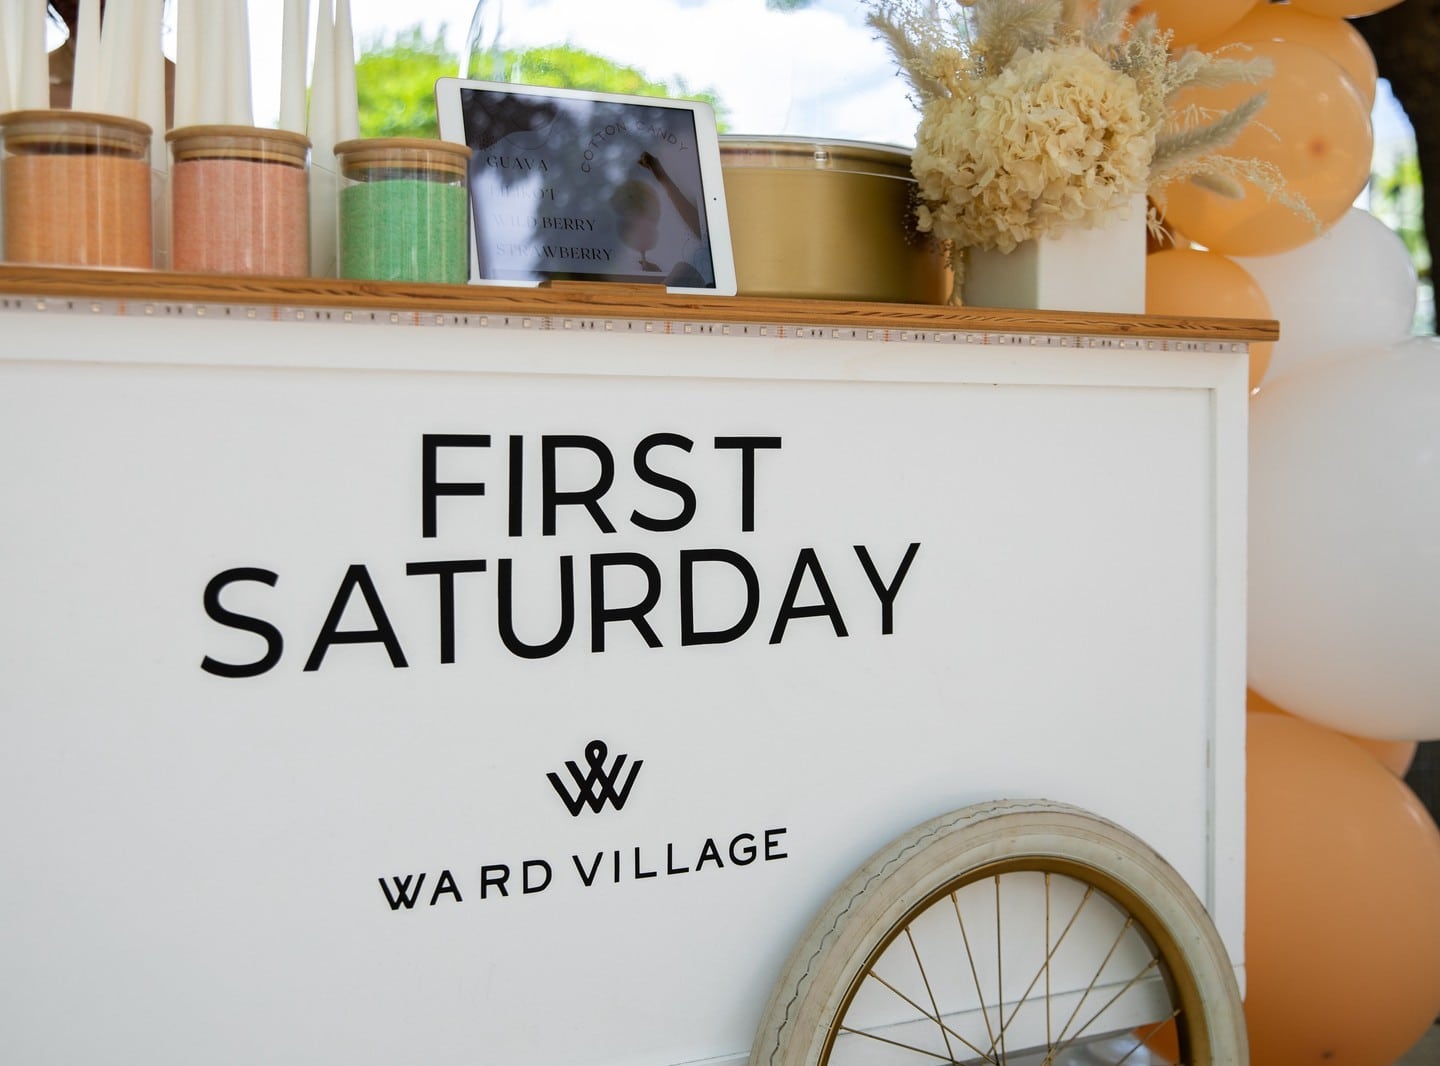 Celebrate First Saturday at Ward Village on September 3 from 1pm – 4pm and enjoy complimentary gourmet pretzels by @kaleleeats. Find them at Ward Centre, while supplies last!